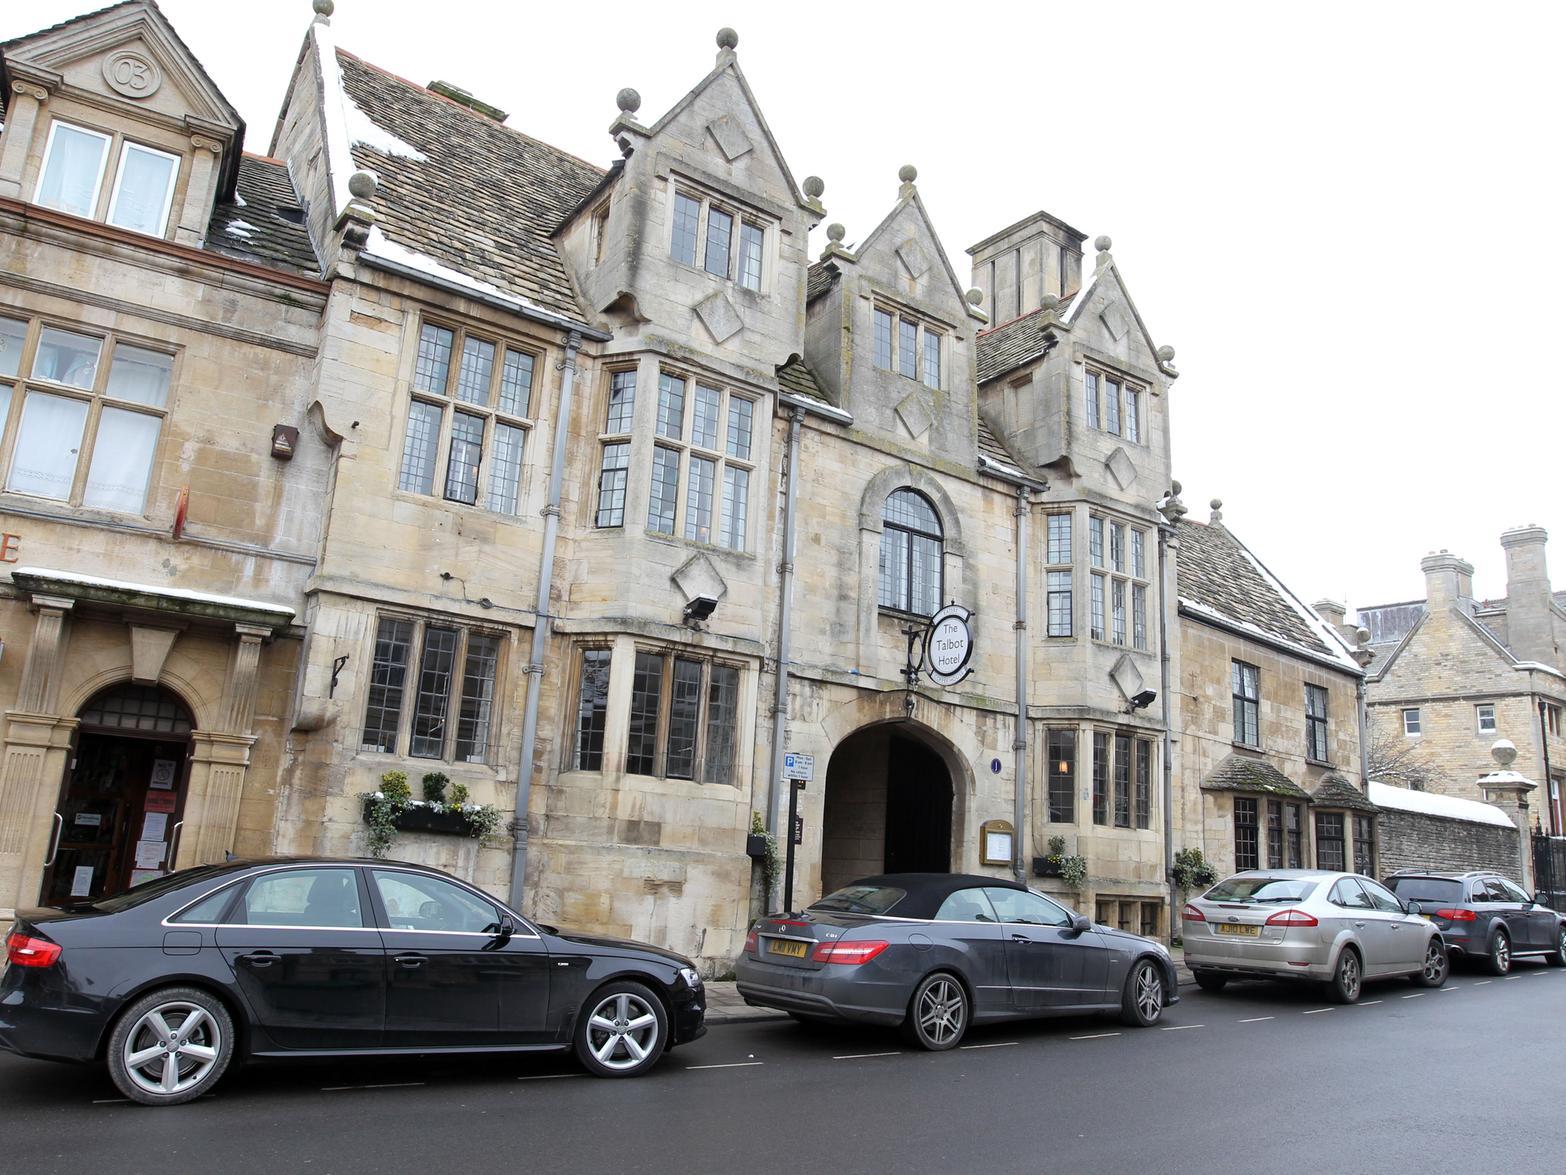 The Talbot in Oundle is also included in the guide.